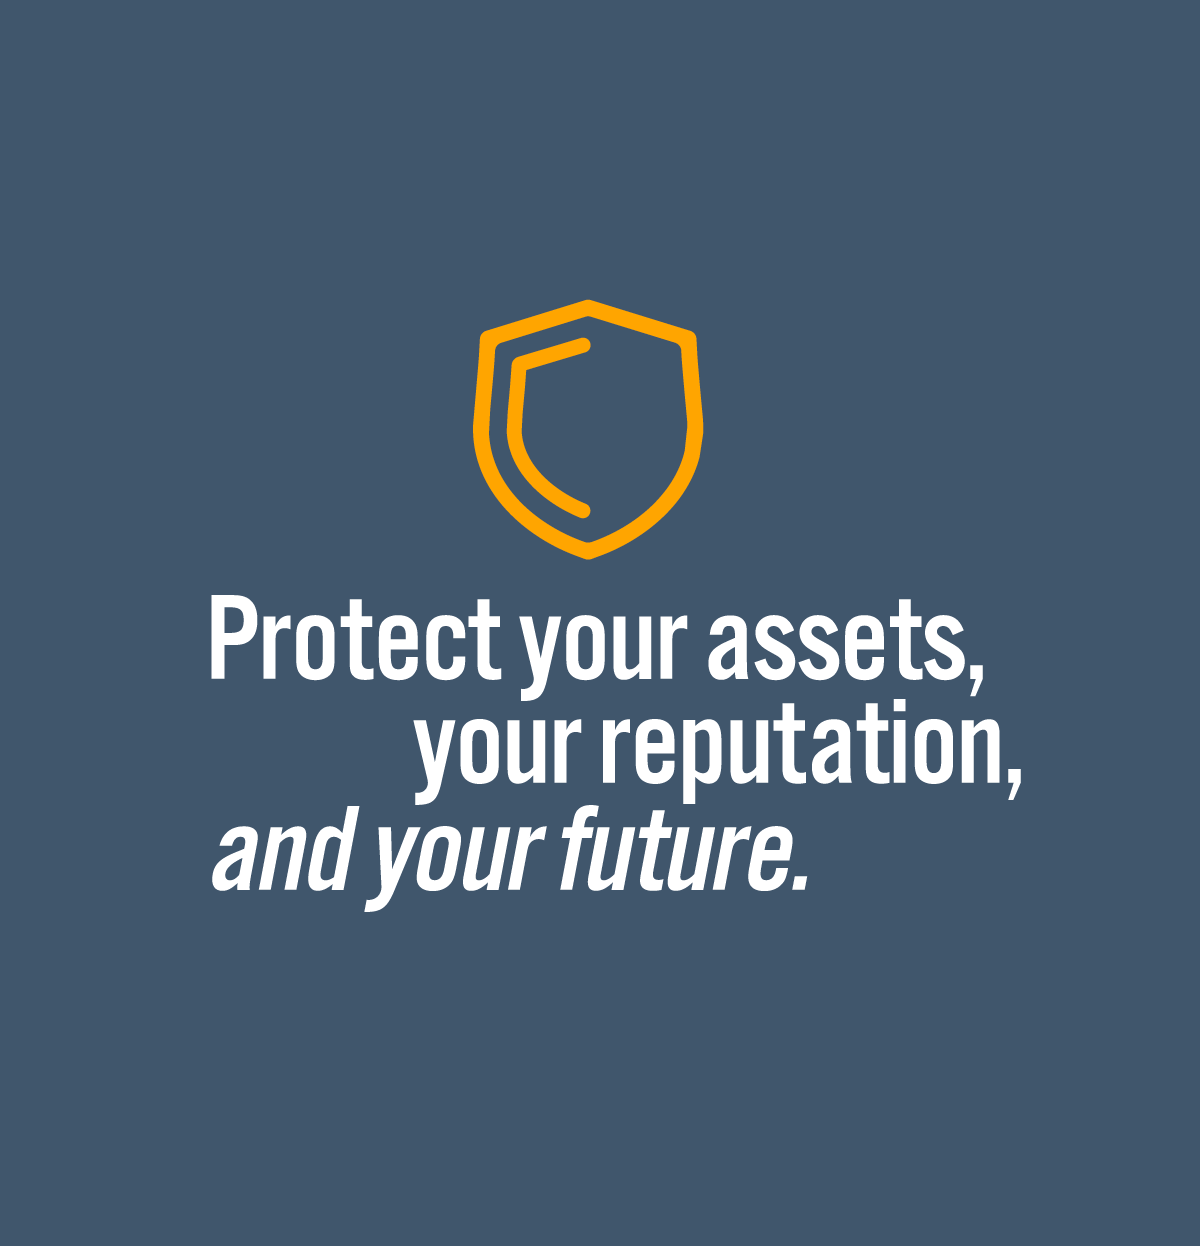 protect your assets, your reputation, and your future